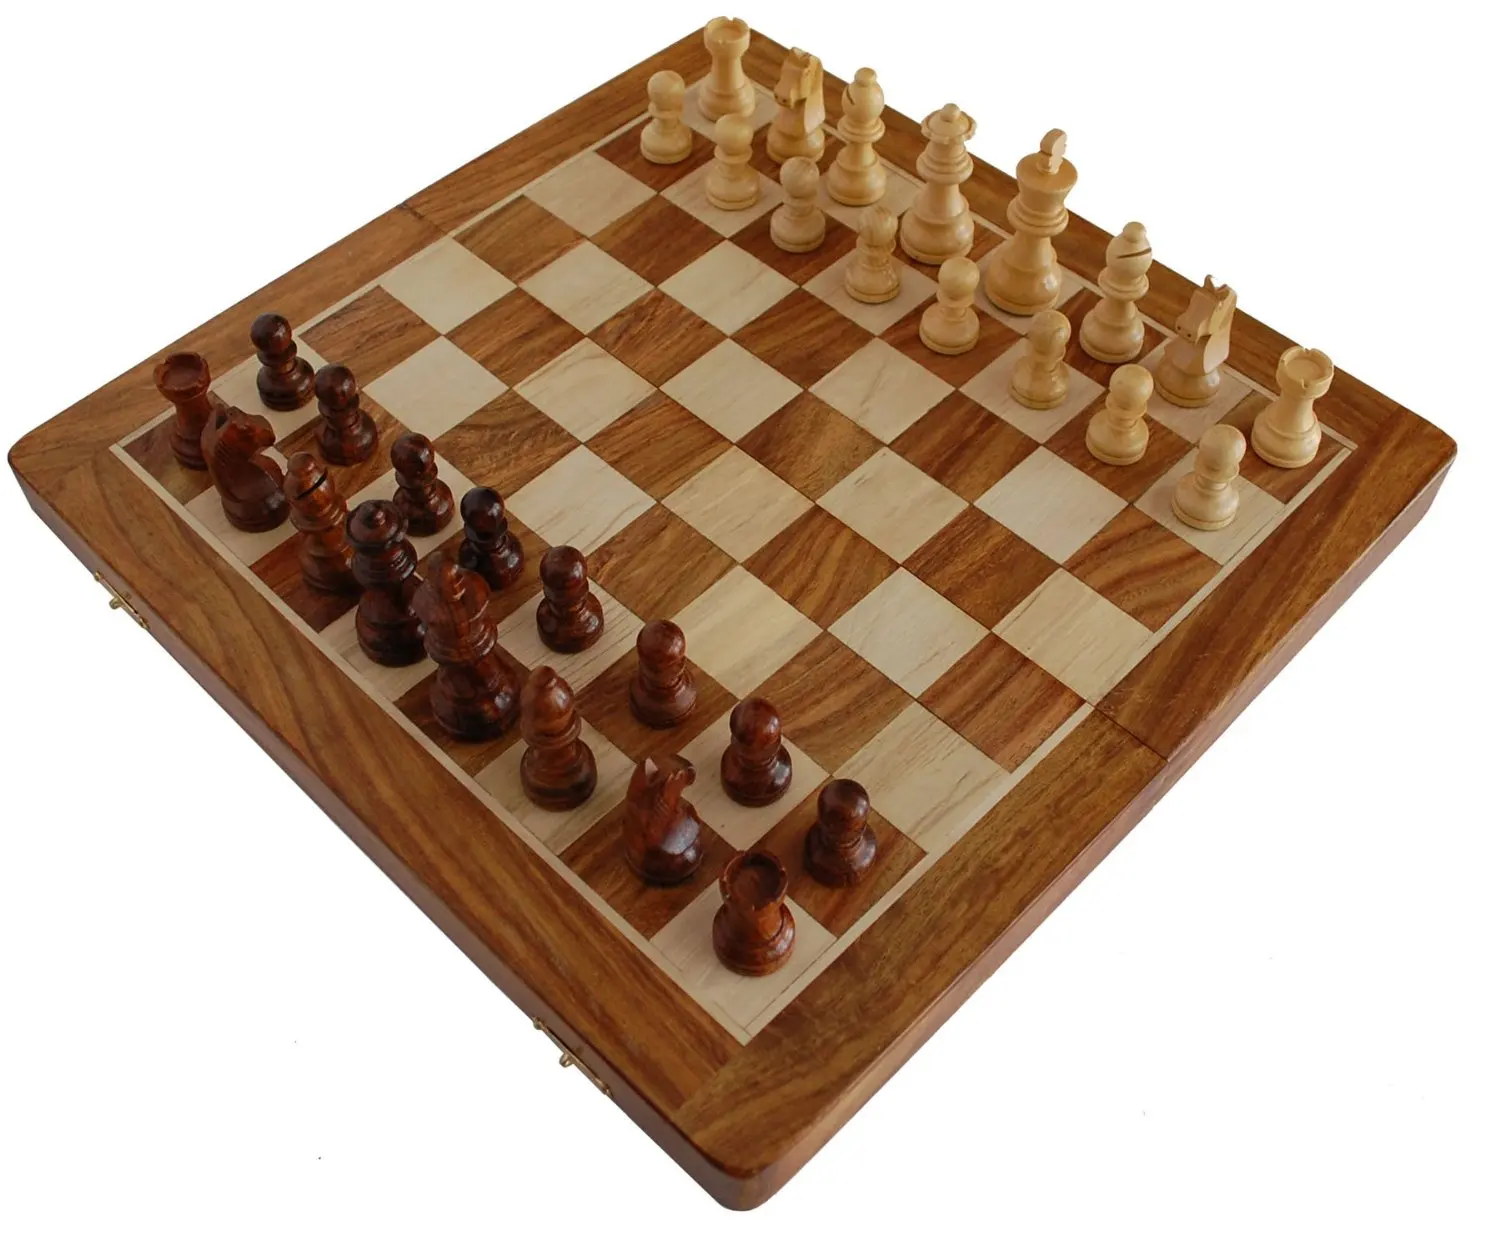 Best Chess Handmade Magnetic Wooden Folding Chess Board with Extra queen /& Storage for Chessmen-Brown||10x10 Inches||